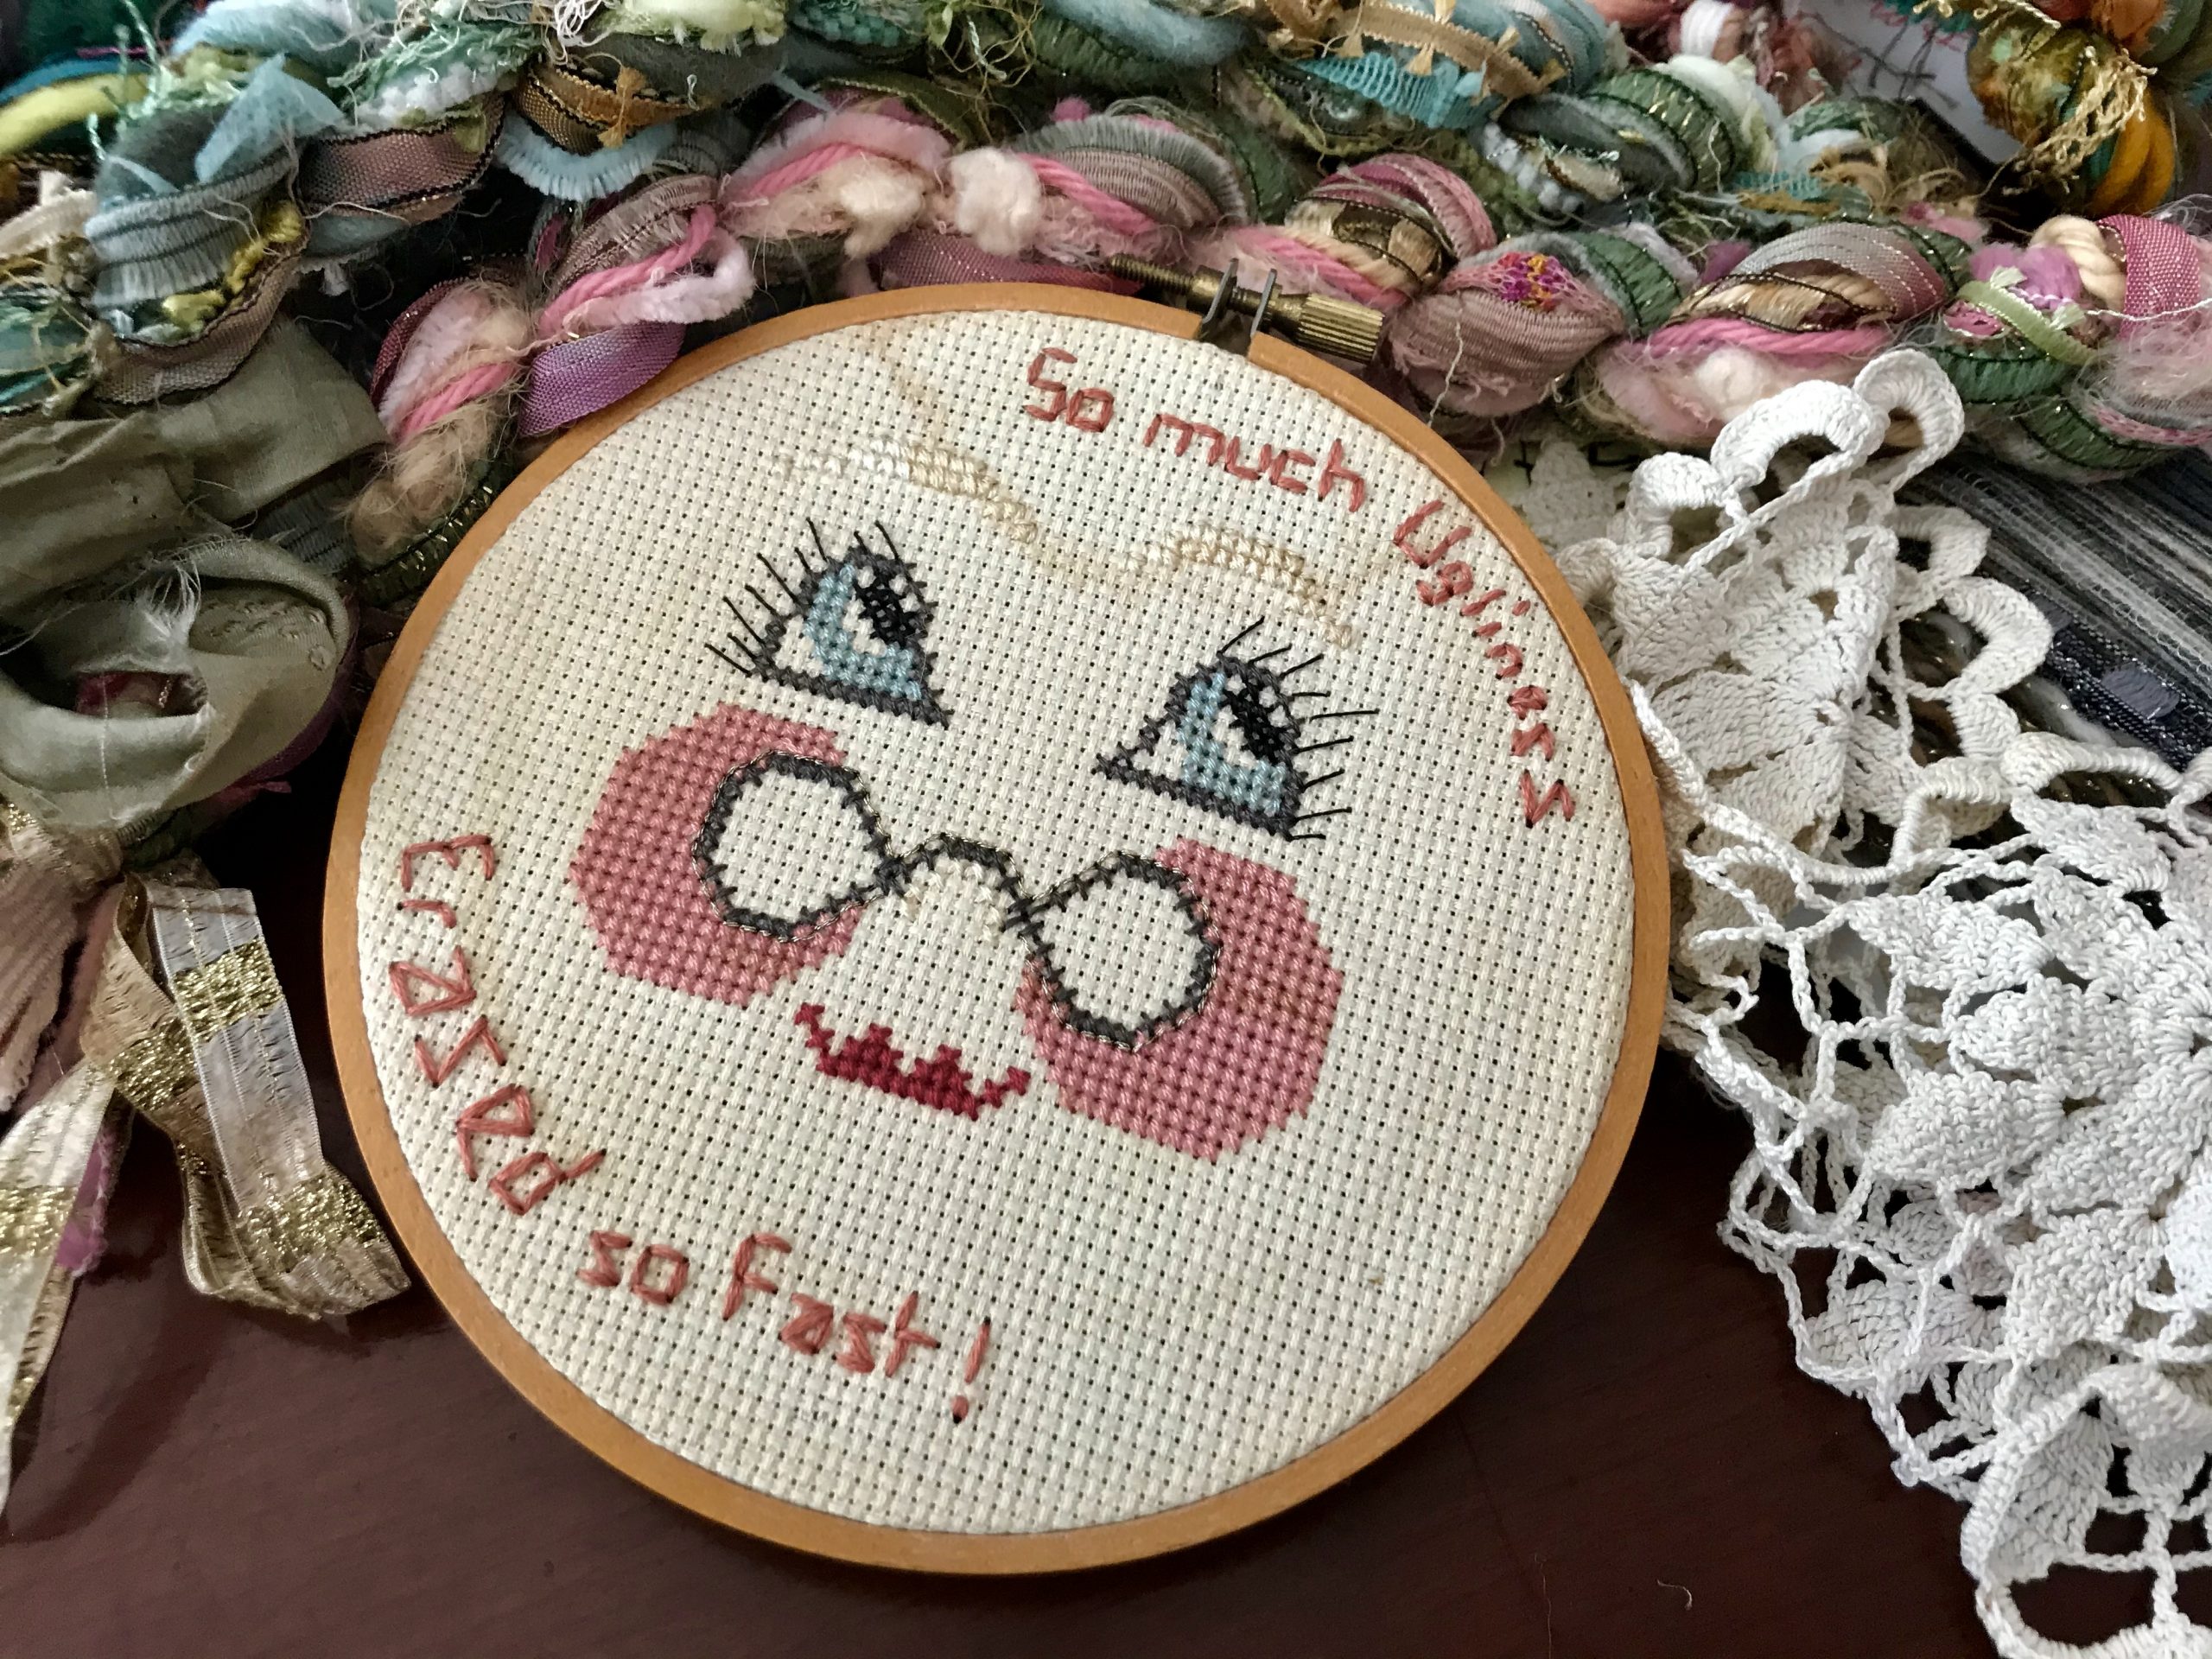 so much ugliness erased so fast on needlepoint sampler